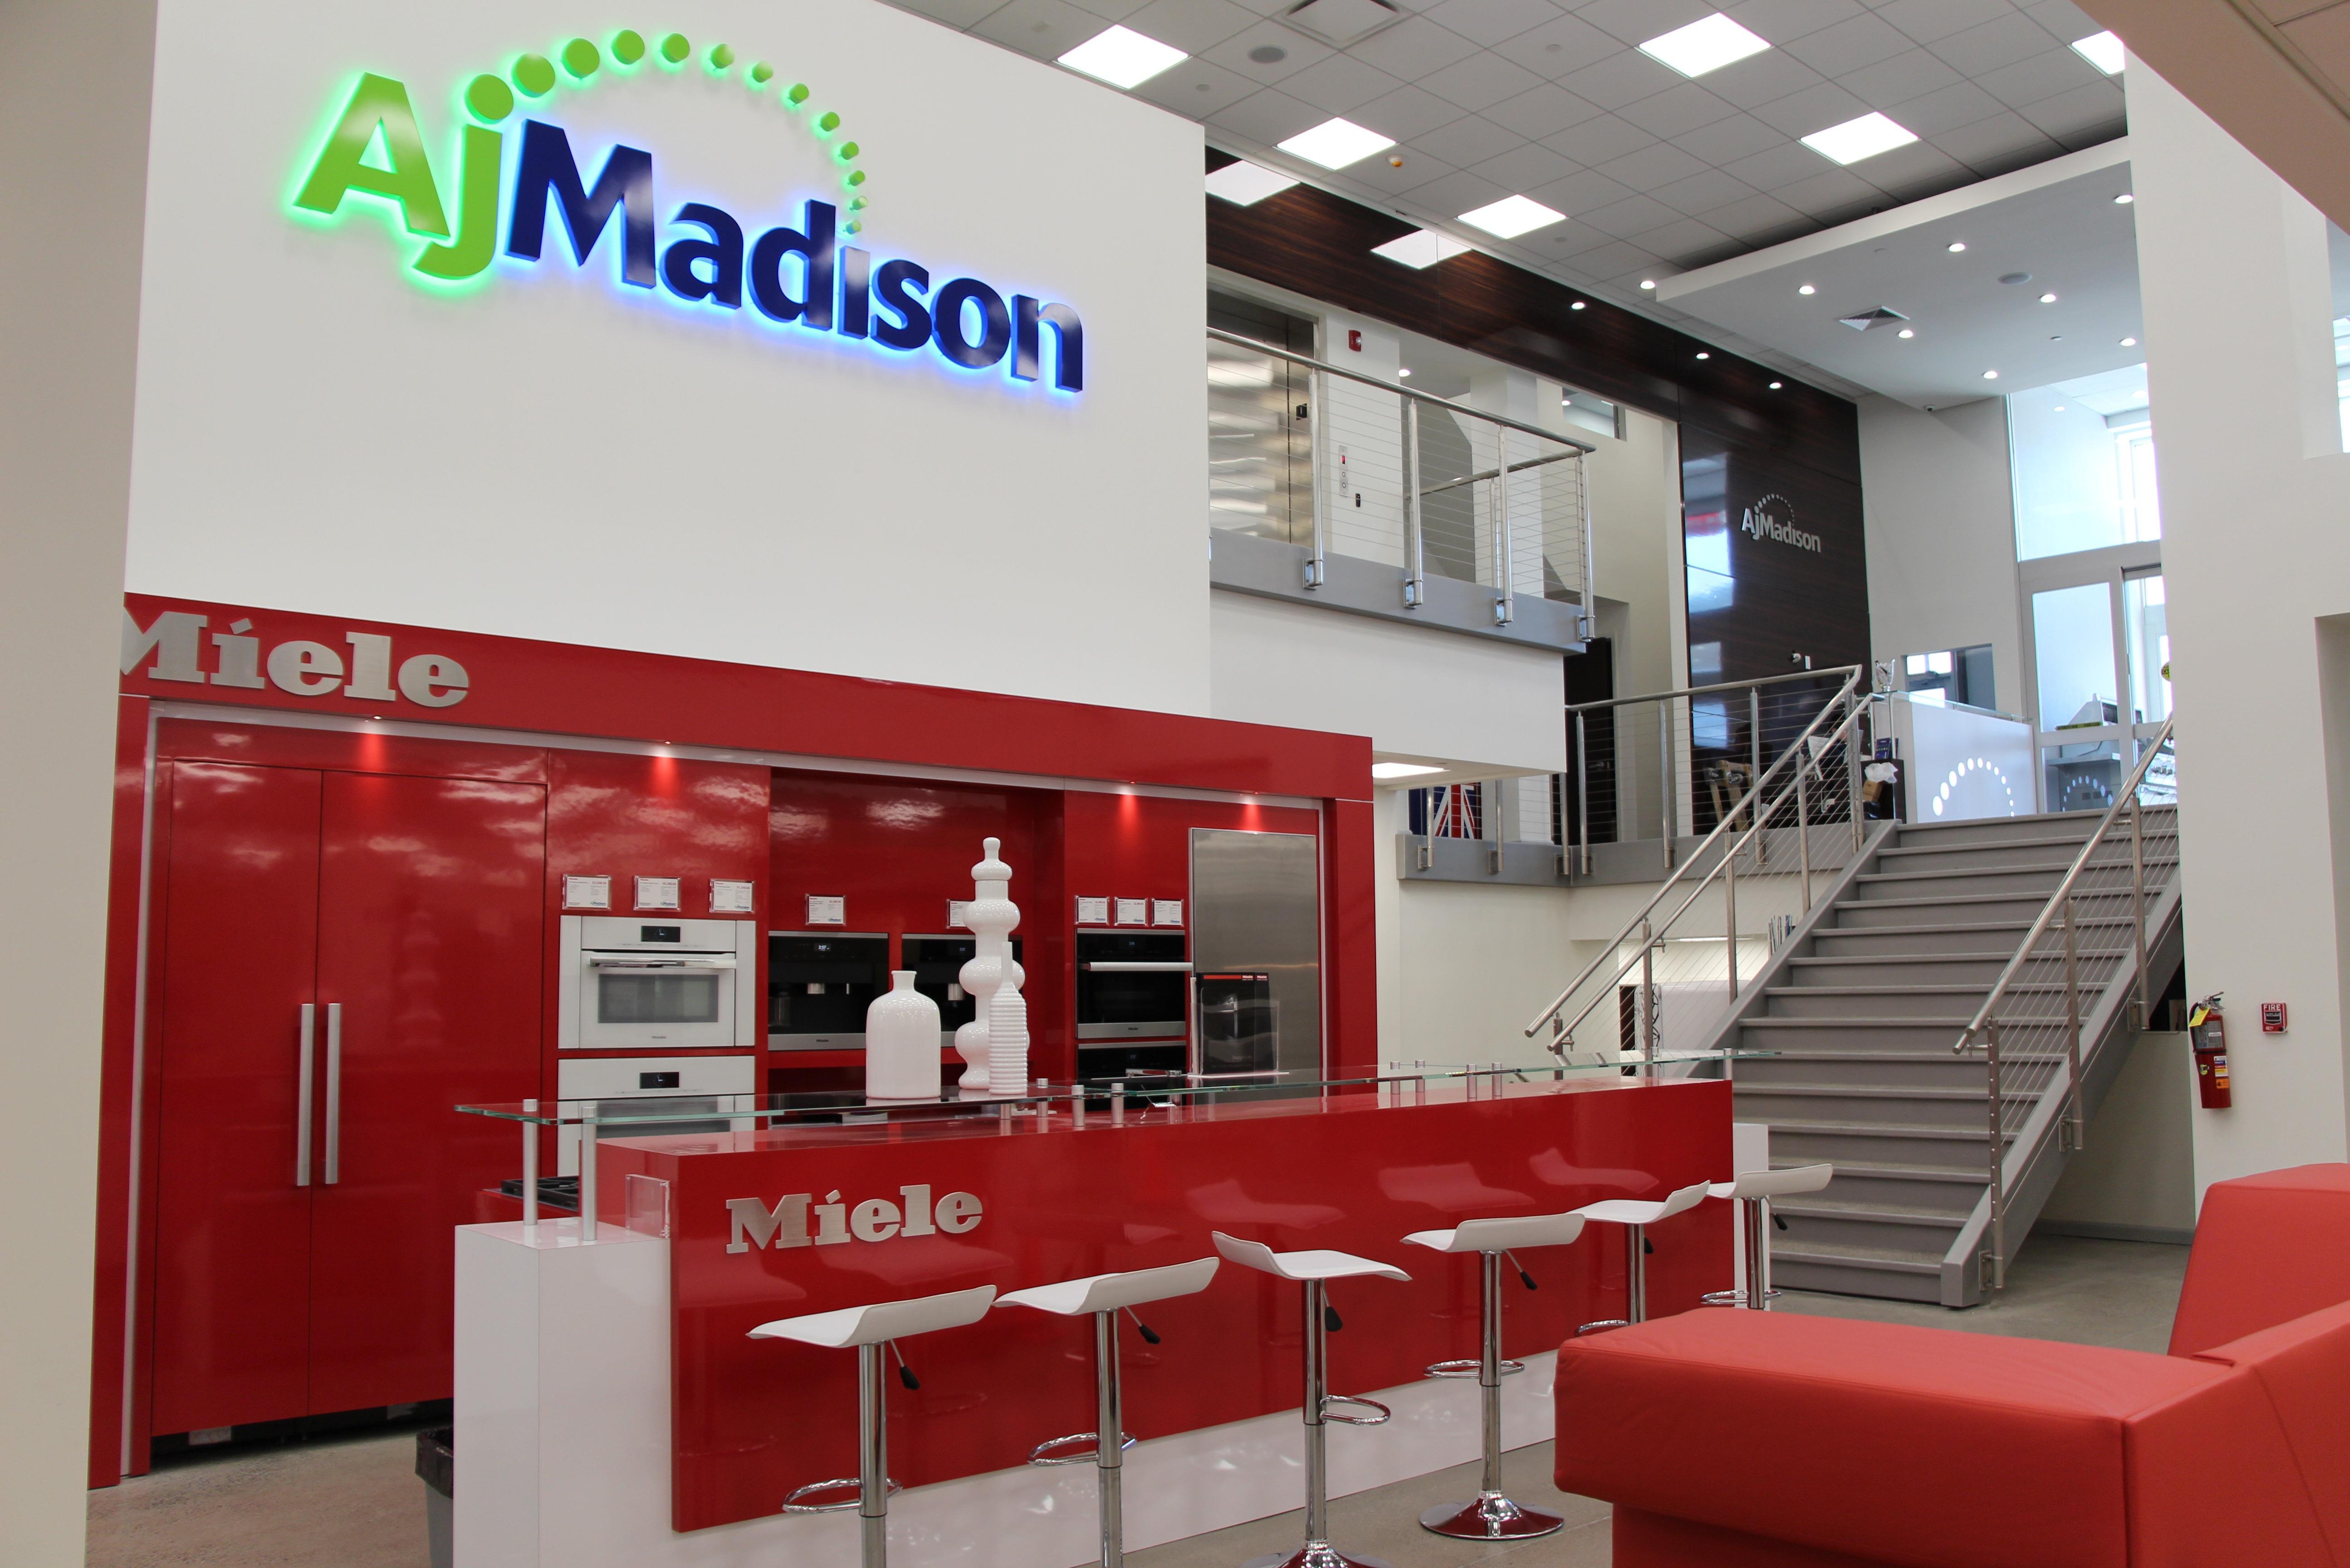 Aj Madison Home Kitchen Appliances Store And More Yp Com